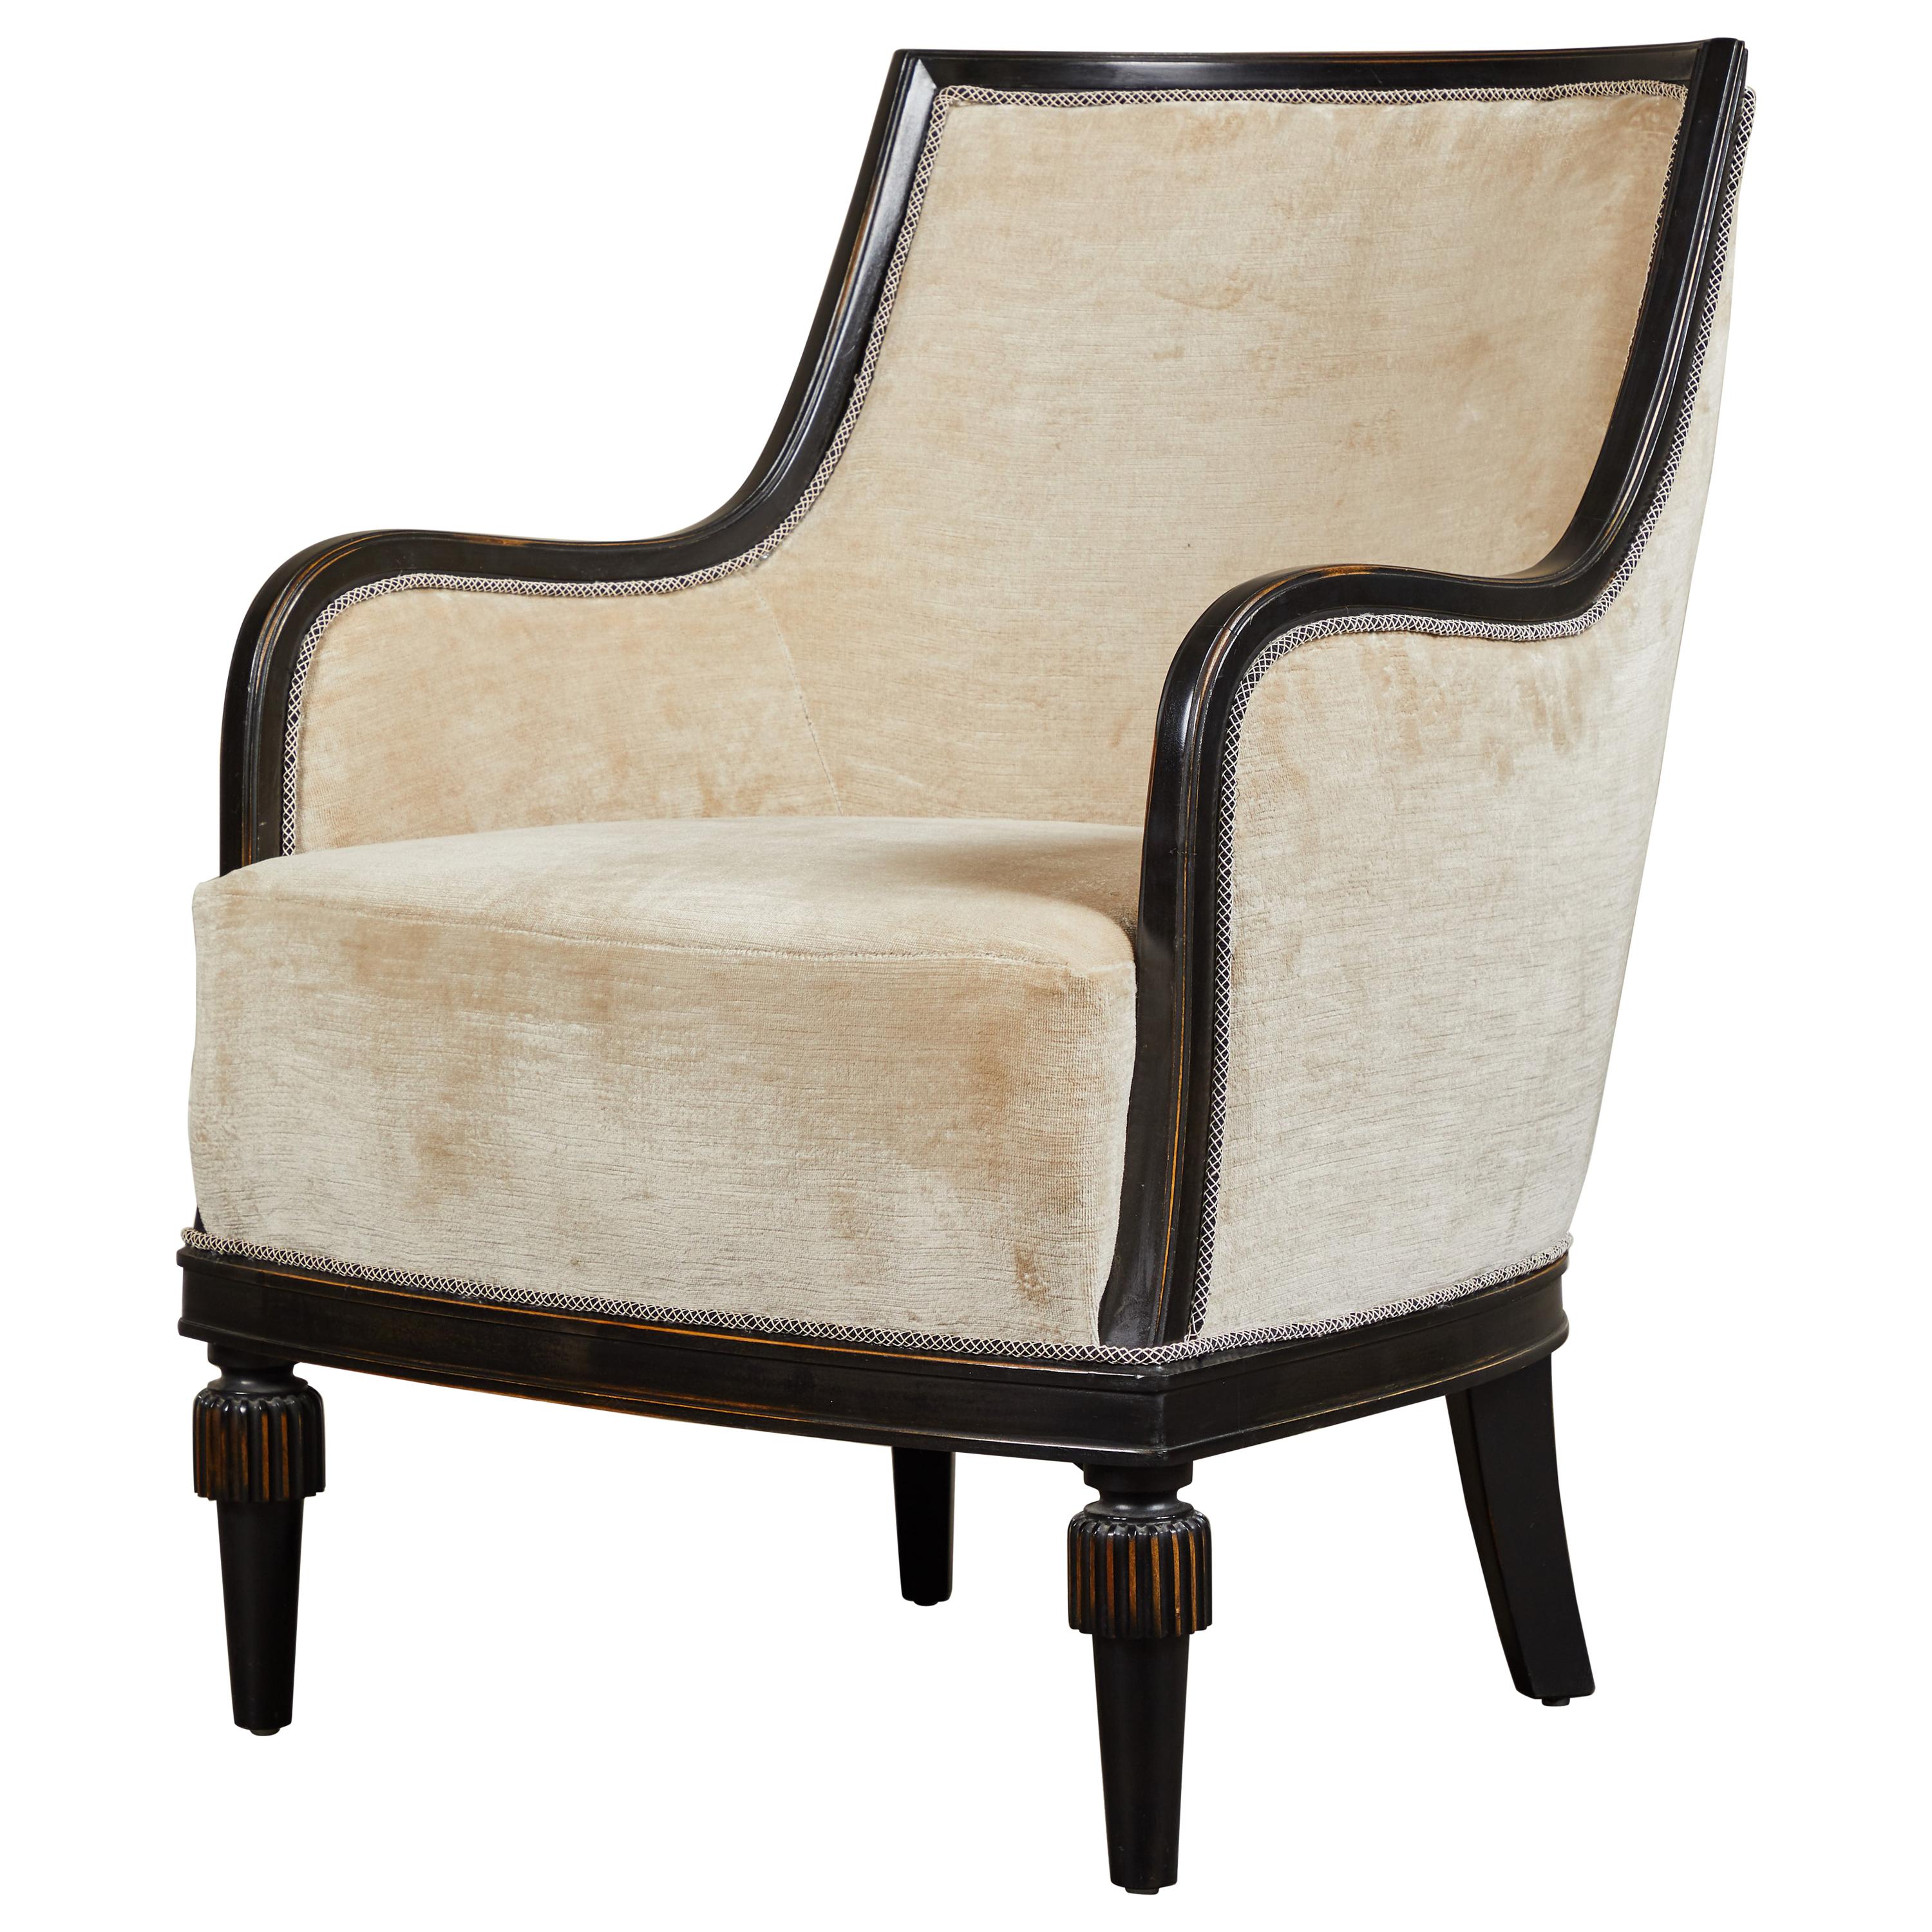 Victoria Chair with Tassel Foot, Susanne Hollis Collection